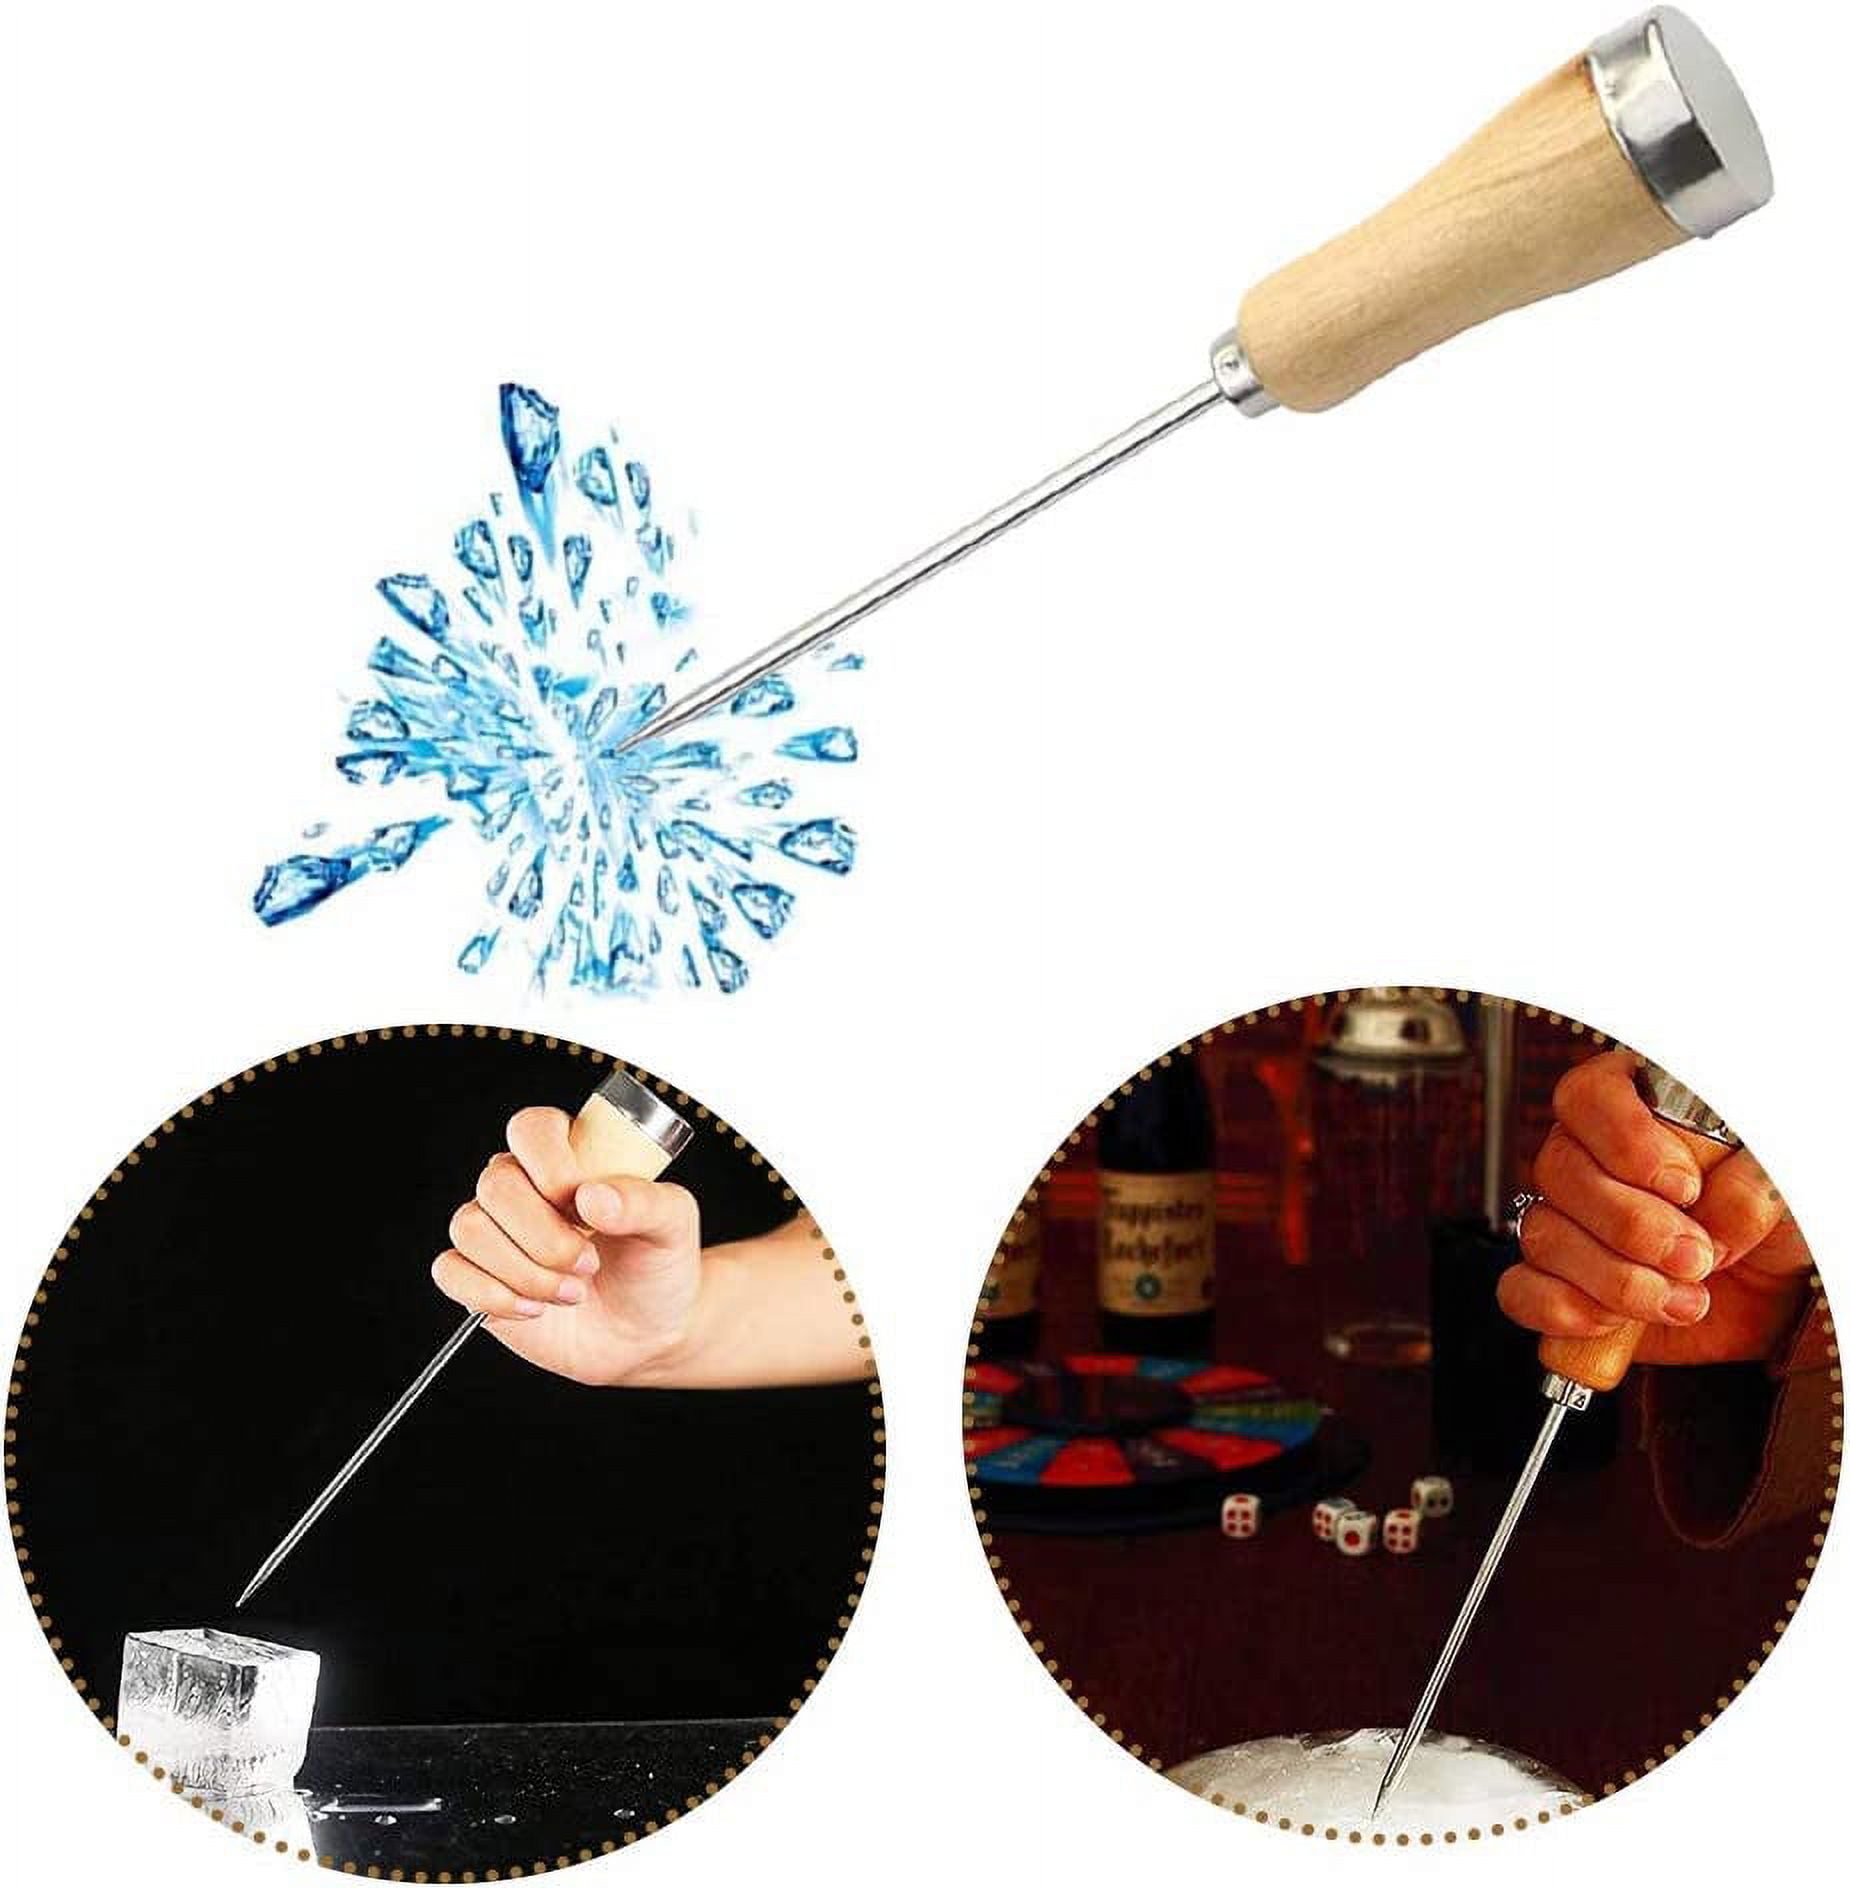 D-GROEE 2PCS Ice Picks Stainless Steel Ice Pick with Safety Wooden  Handle,Ice Breaking Accessories for Kitchen,Bar,Restaurant 